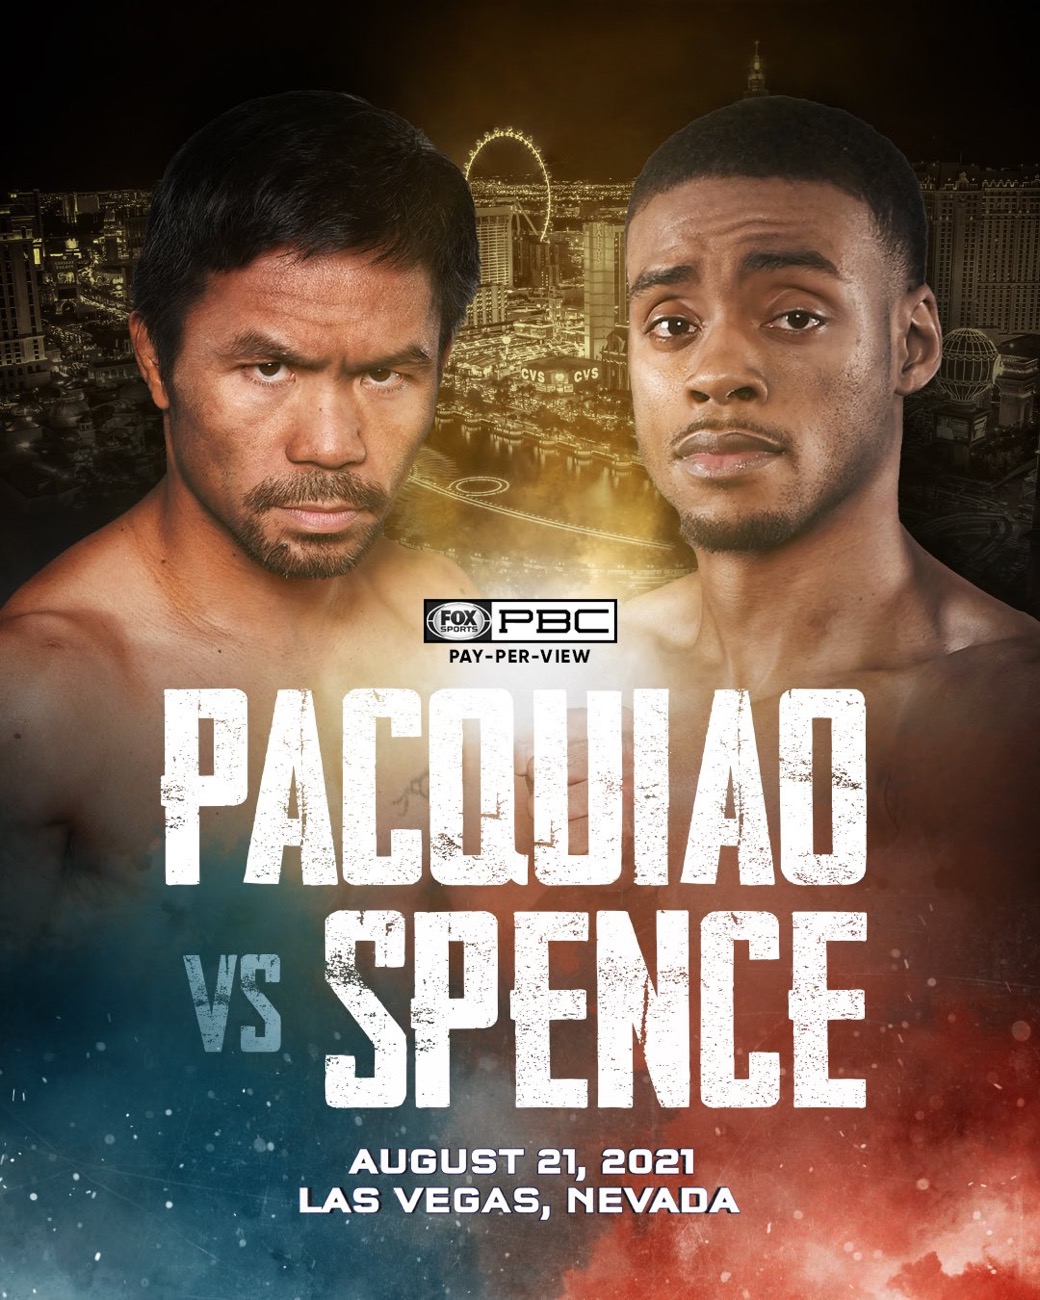 Pacquiao, Spence Jr topping headliner pay-per-view event on August 21